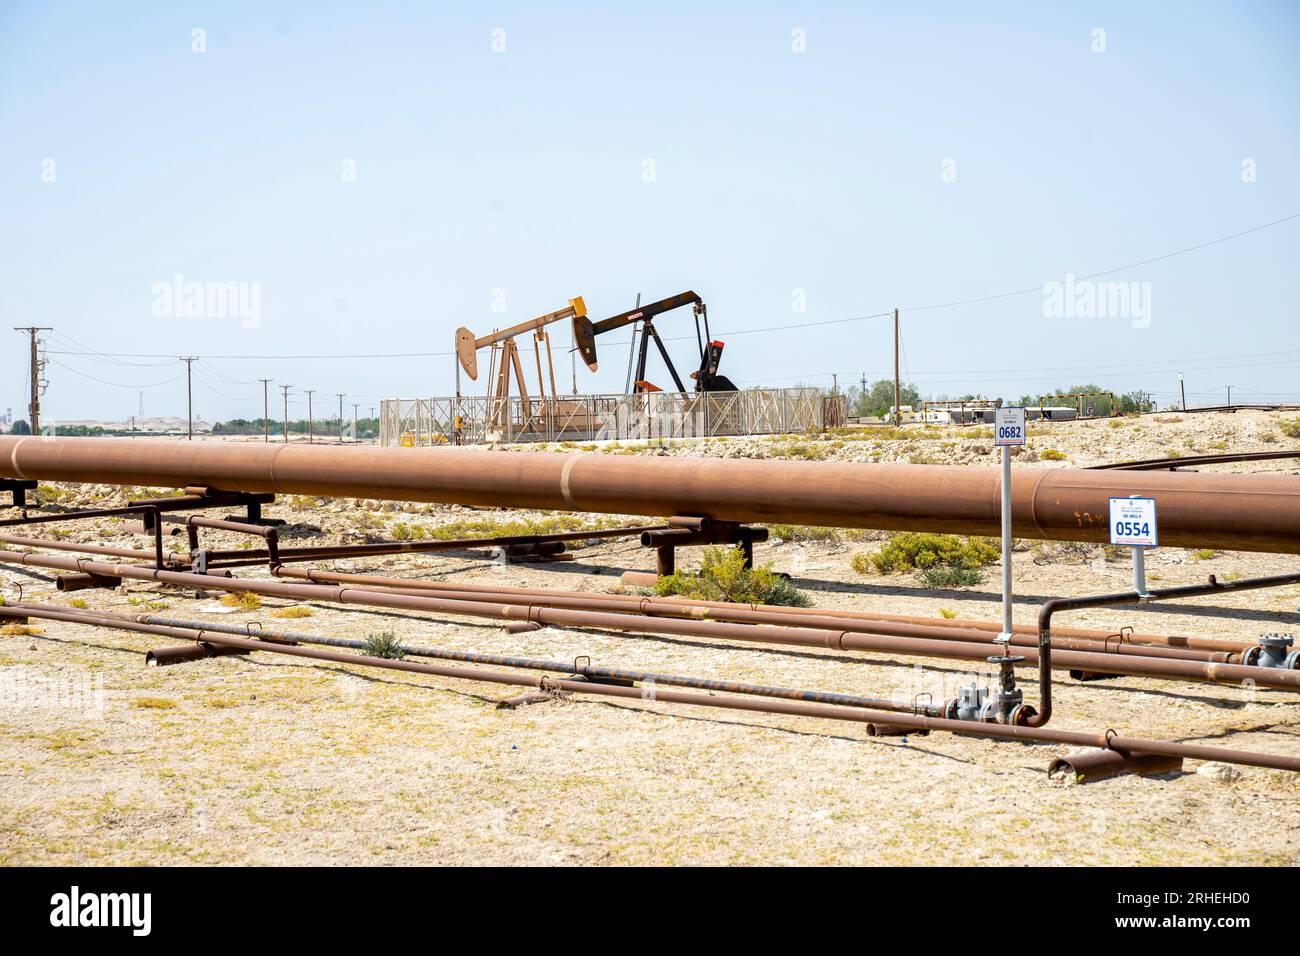 Bahrain oil field infrastructure -  oil pipes, pump jack,oil horse, oil jack, beam pump extracting crude oil from oil well in the Bahrain desert Stock Photo